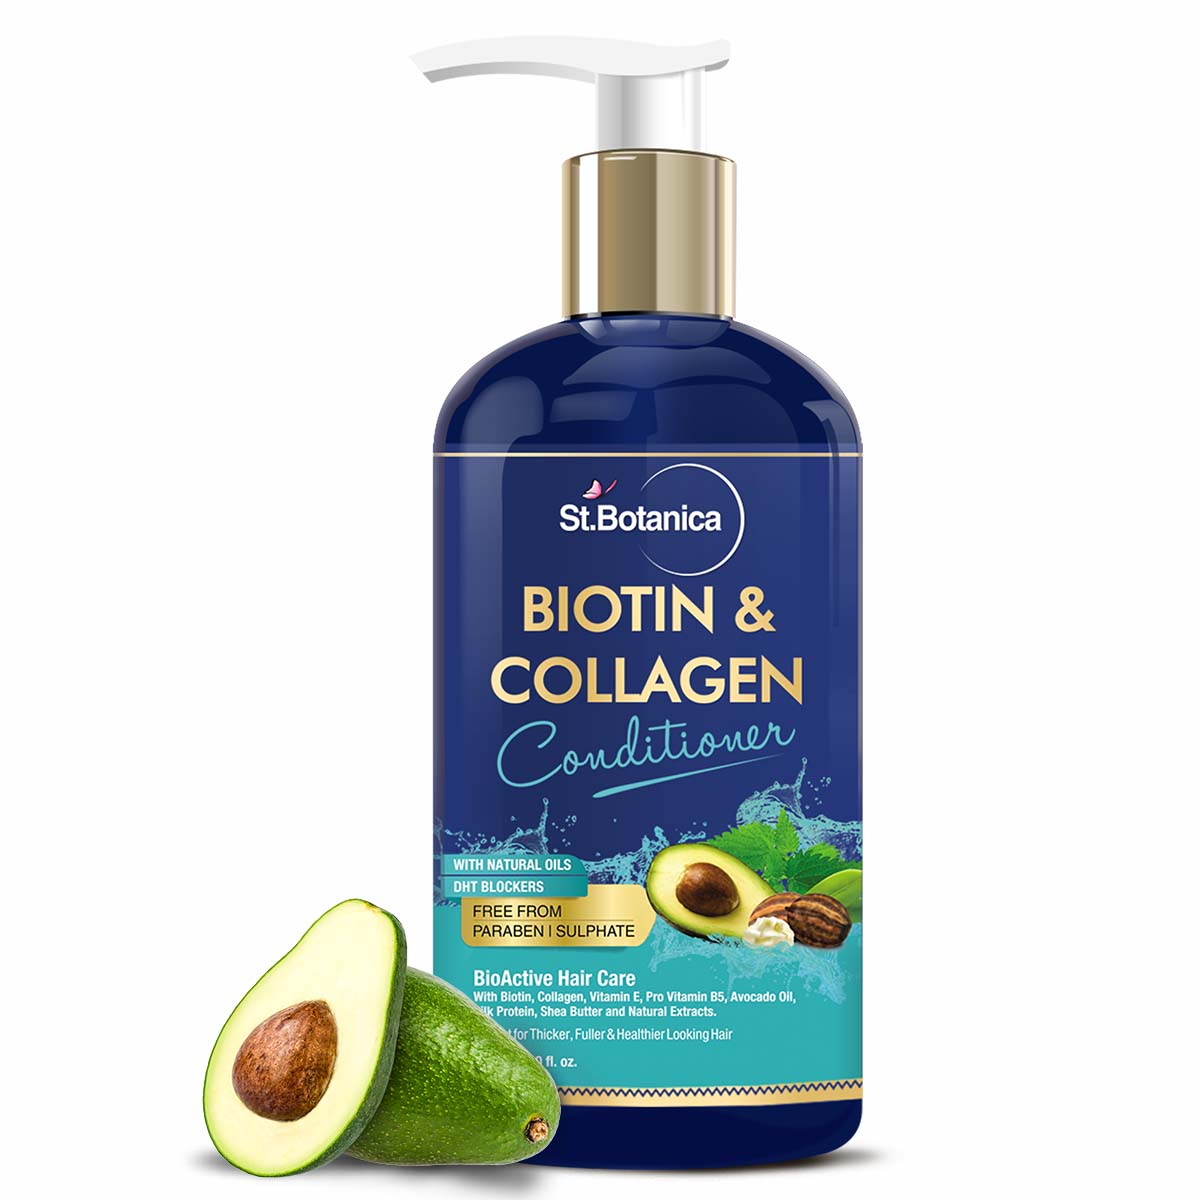 St.Botanica Biotin & Collagen Hair Conditioner, 300ml - For Thicker, Fuller and Healthy Hair, with Pro-Vitamin B5, E, Saw Palmetto & Shea Butter